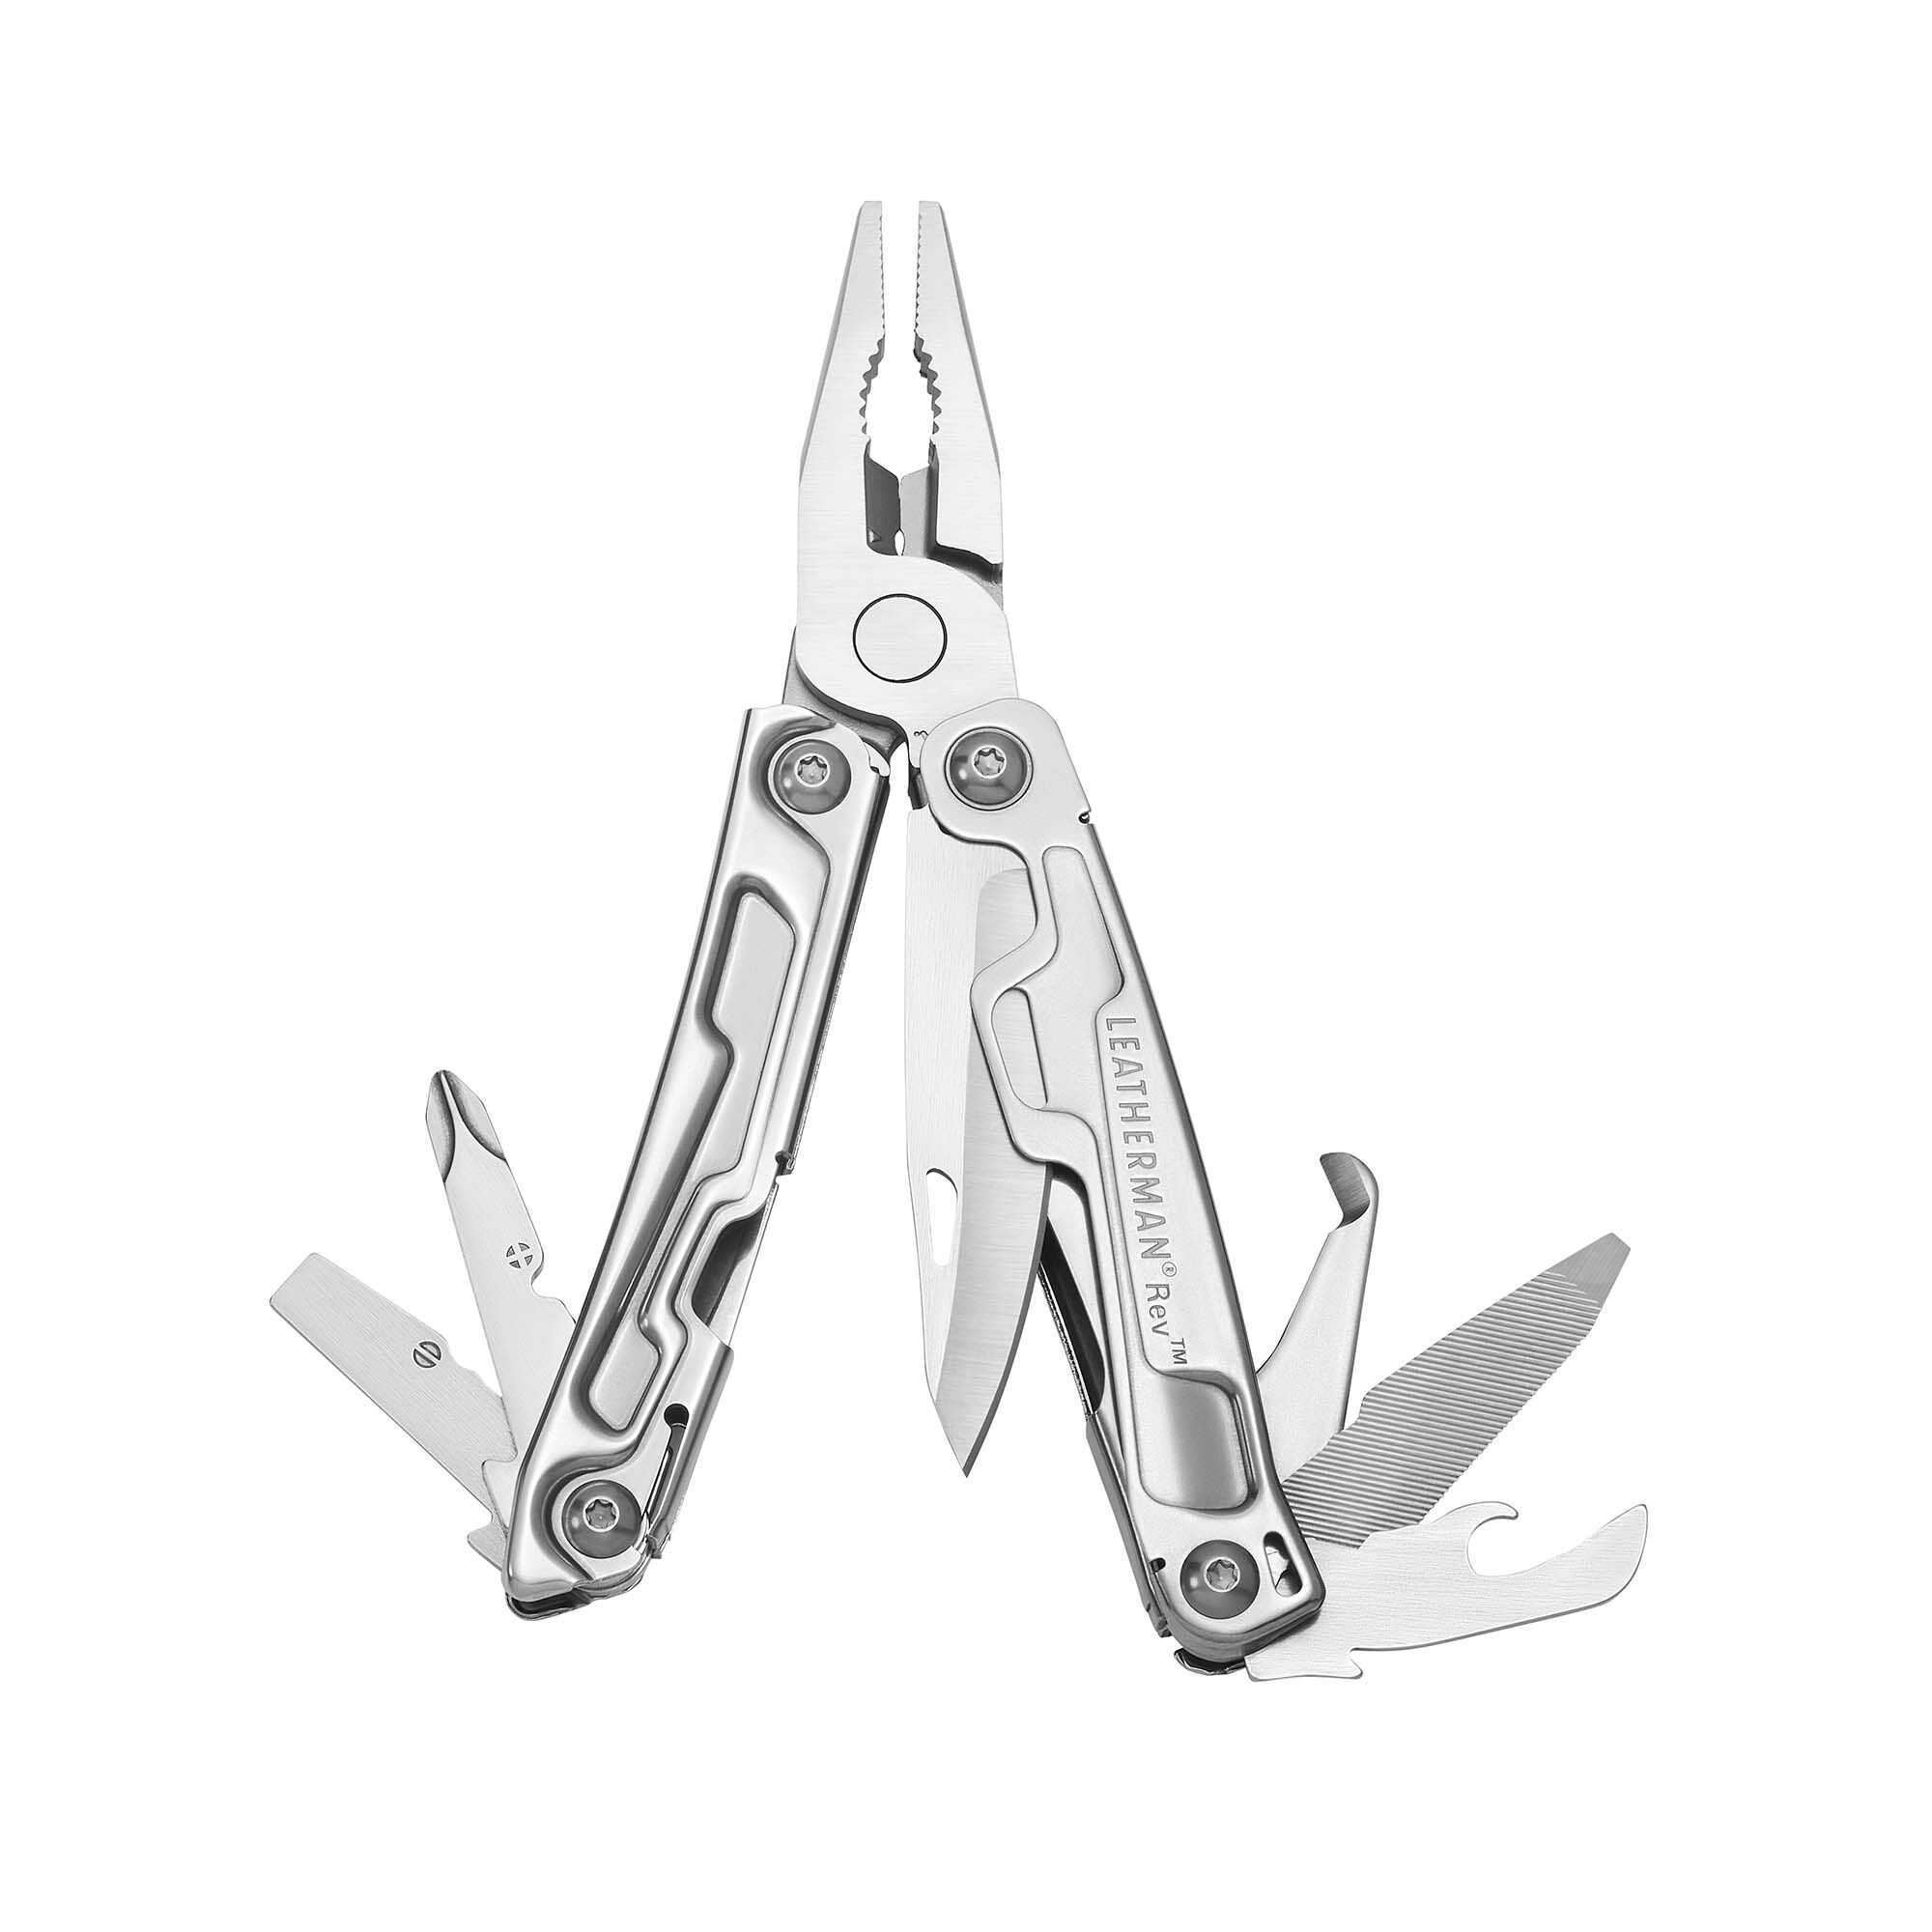 Mini Multitool Knife 12in1 Multi Tool Set Small Tools, Outdoor Hand Tools -  Best Pocket Knife Mini Pliers Screwdriver + Nylon Sheath, Stainless Steel, Great Gifts for Men Women